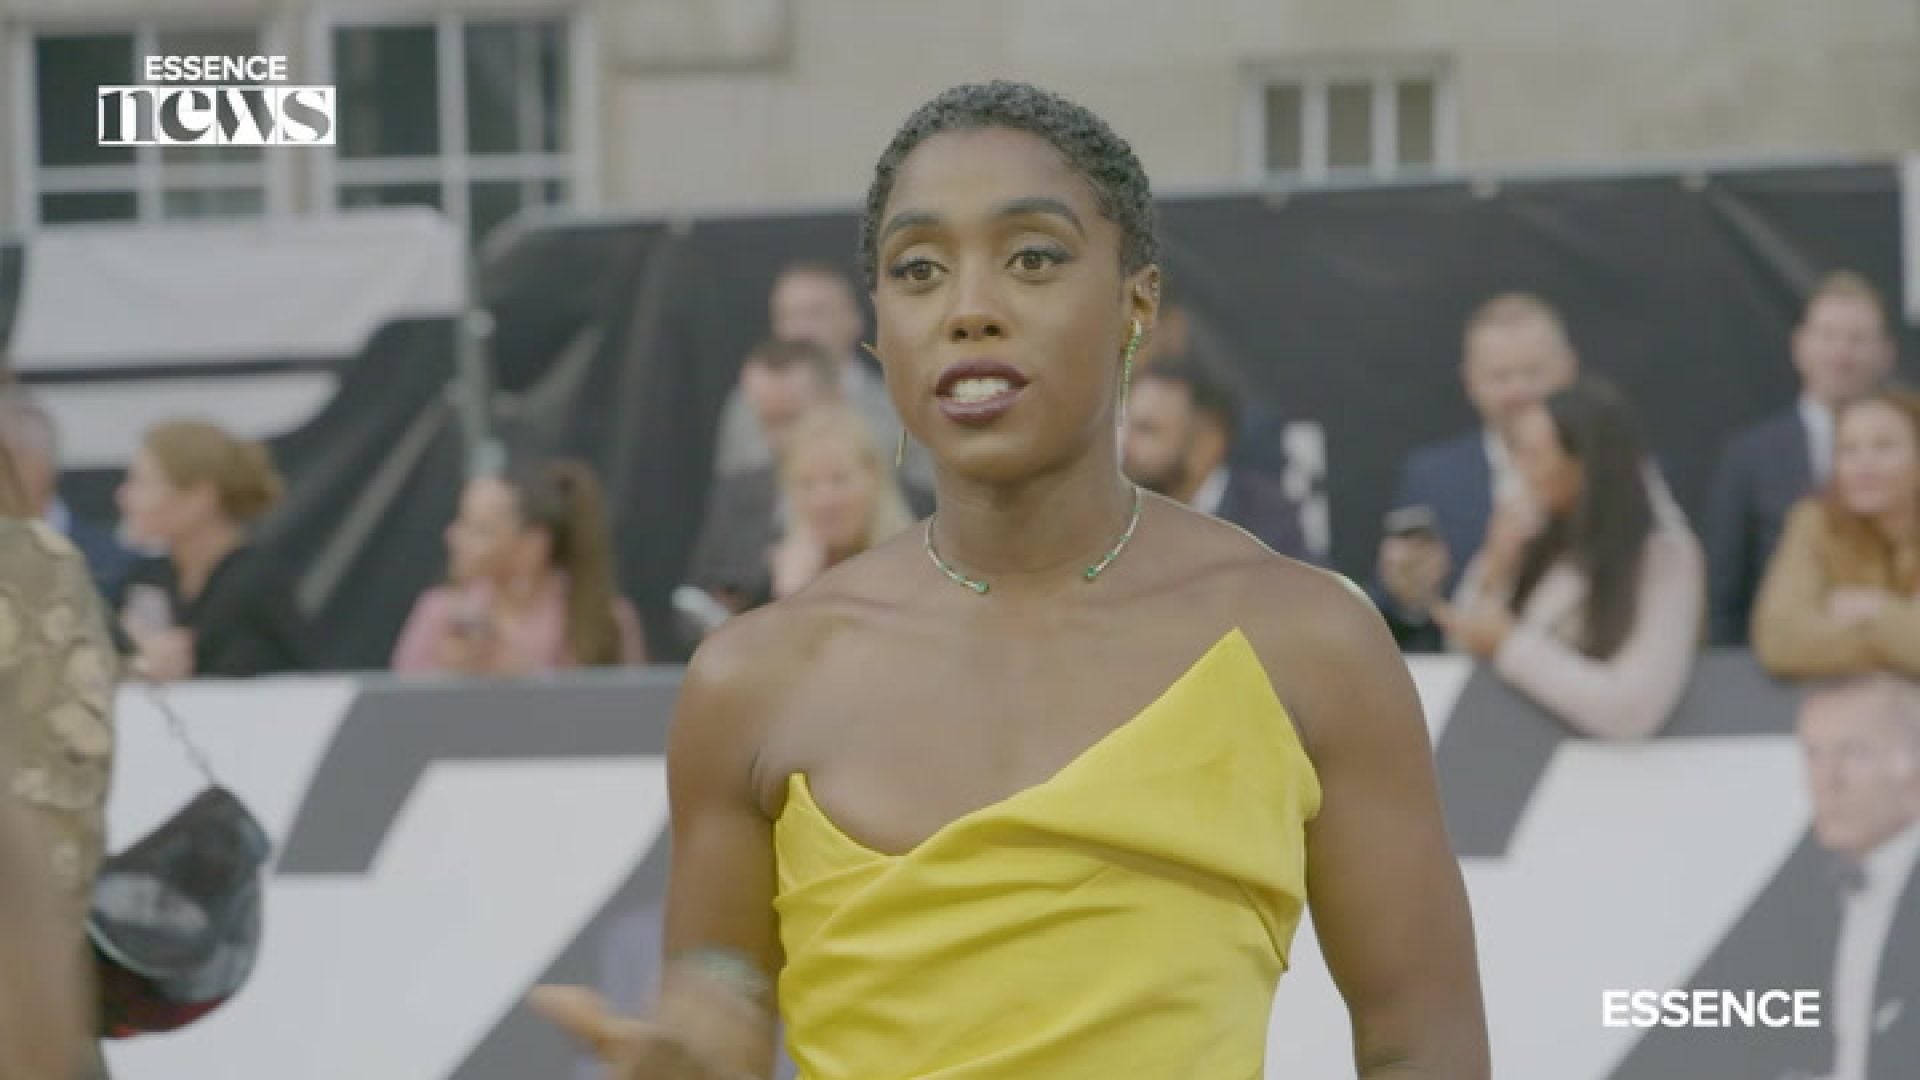 Lashana Lynch Pays Homage to Her Jamaican Roots